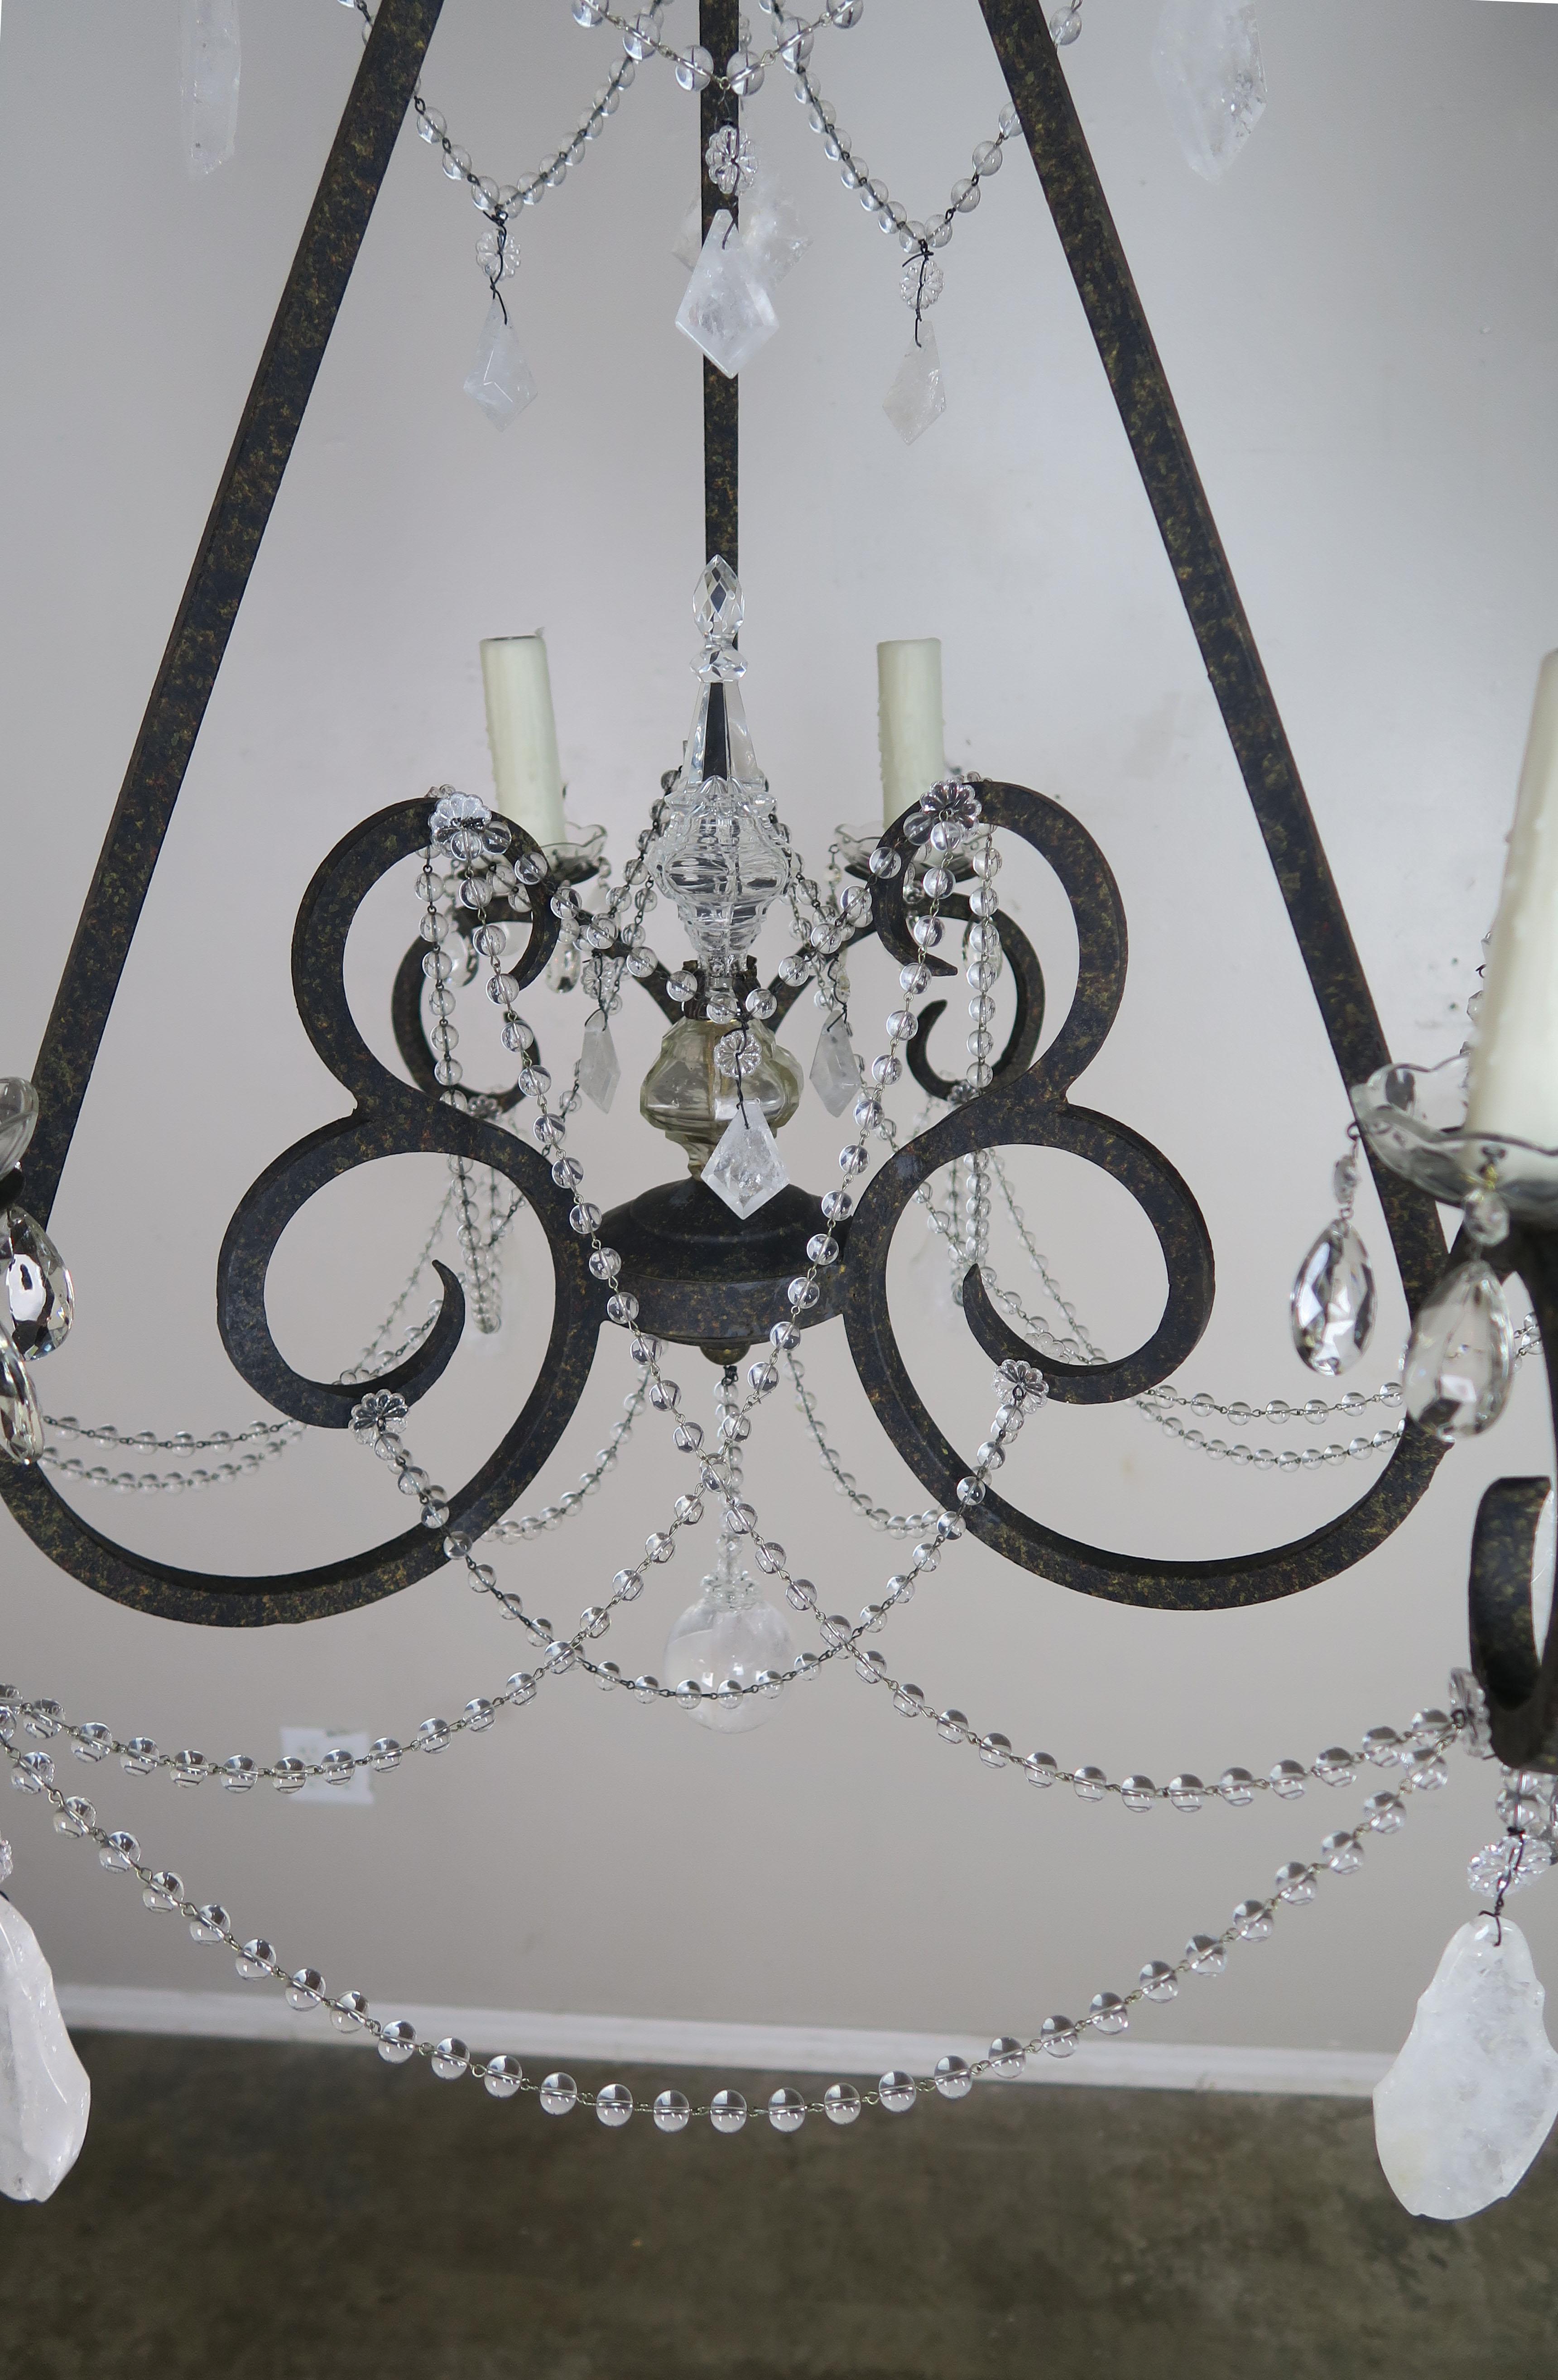 Six-Light Rock Crystal Wrought Iron Chandelier In Excellent Condition For Sale In Los Angeles, CA